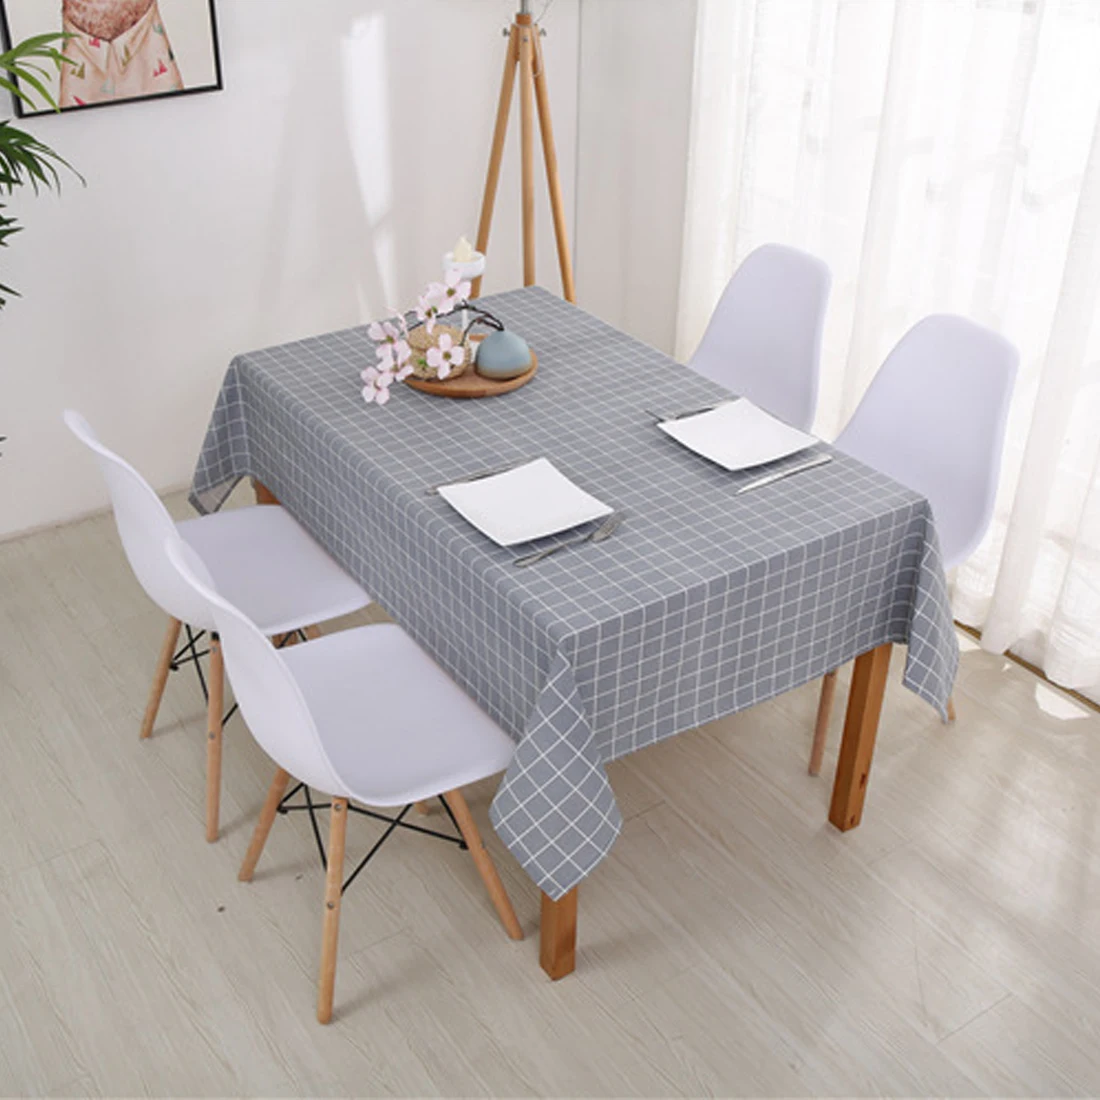 

6 Sizes Table Cloth Country Style Plaid Print Rectangle Square Table Cover Tablecloth Home Textile Home Kitchen Decoration